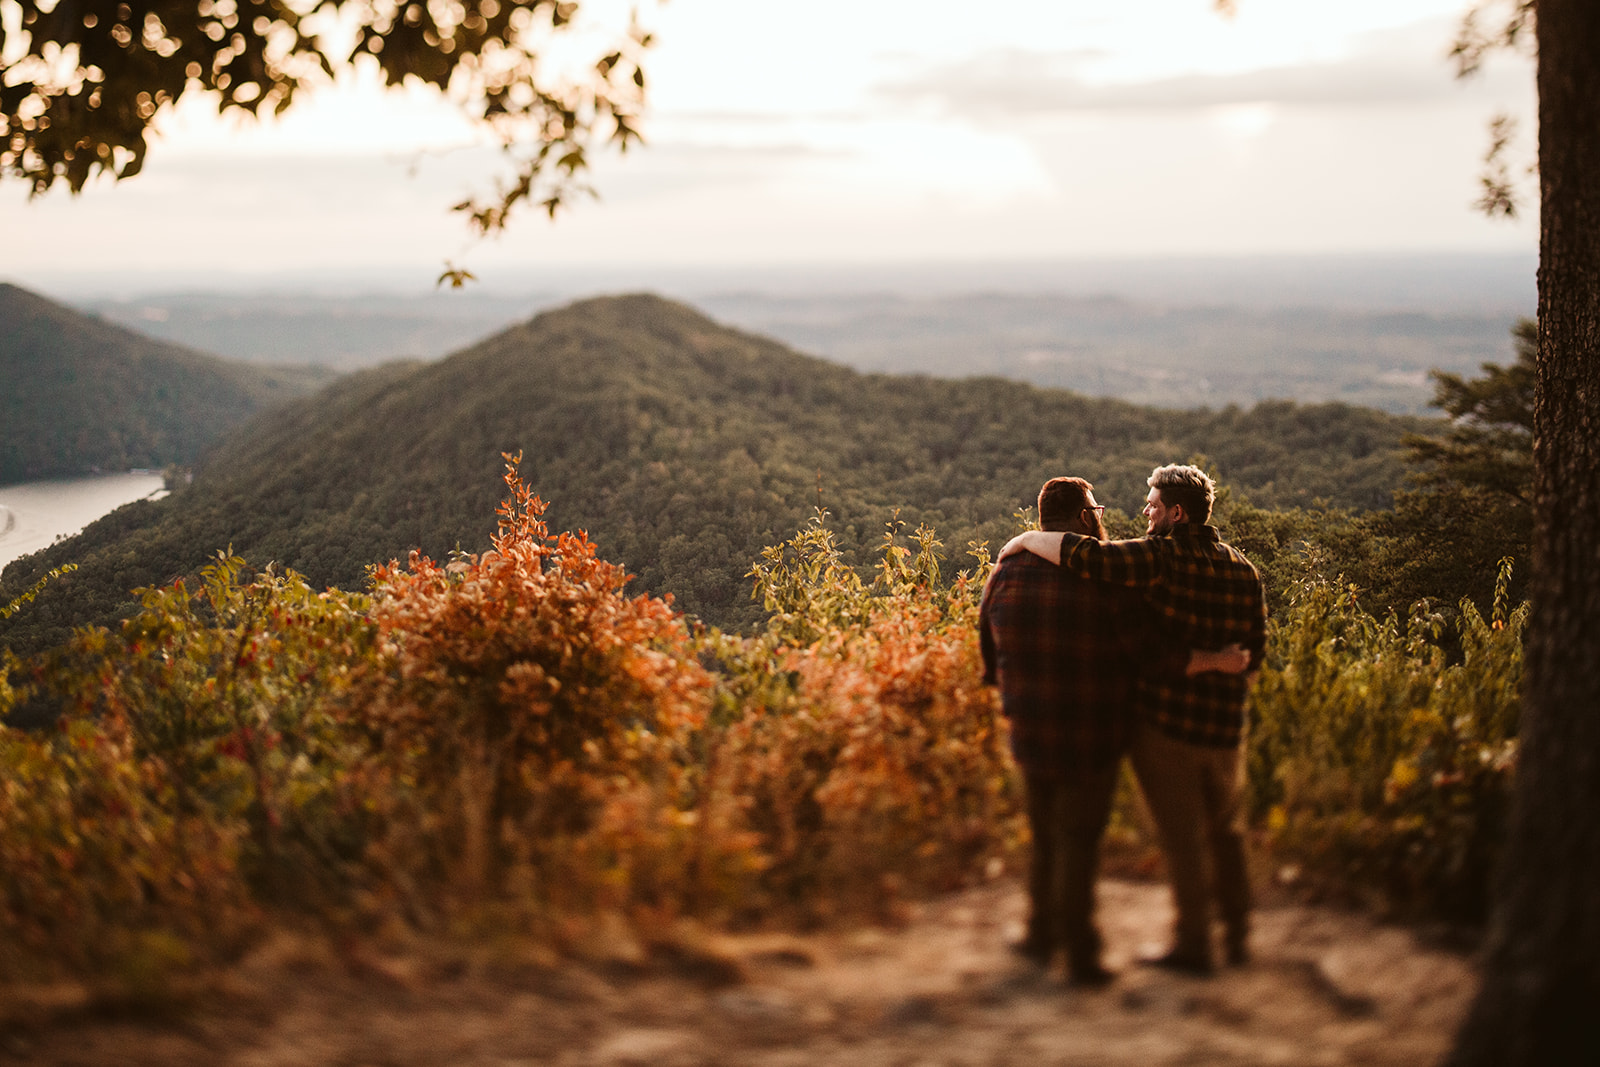 Couple embraces on a mountain overlook during their engagement photo session near Chattanooga.